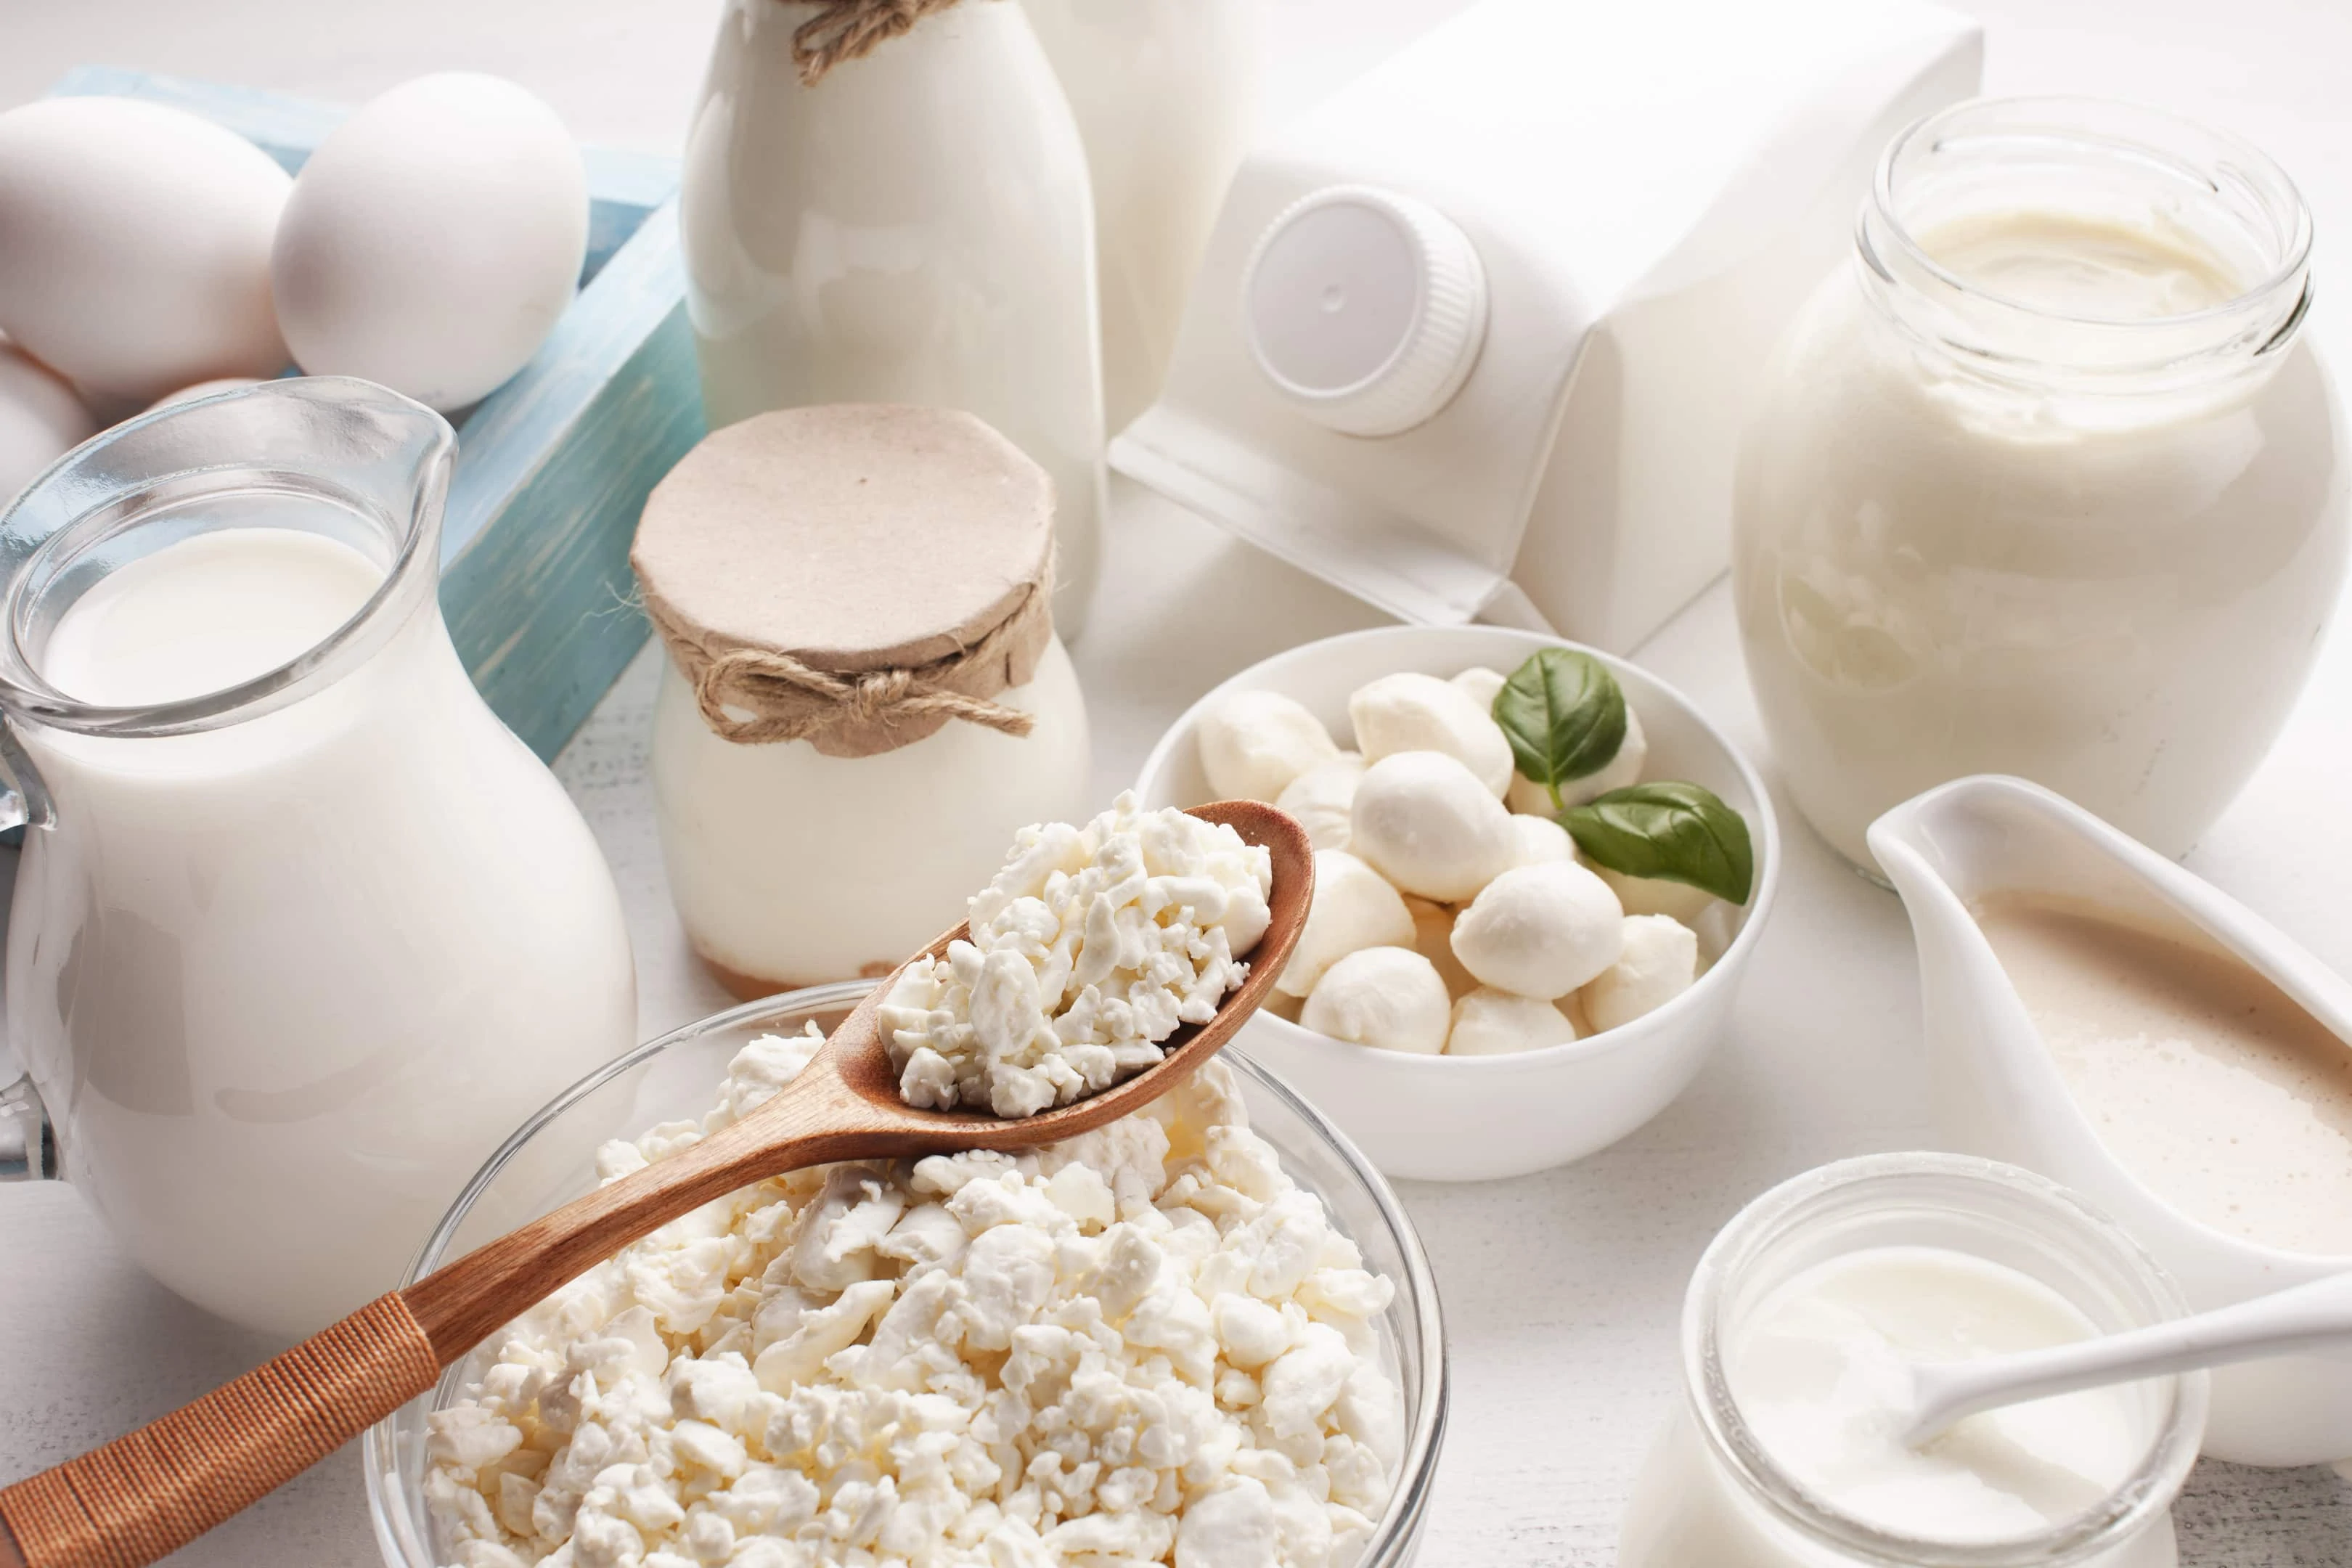 Processed dairy products